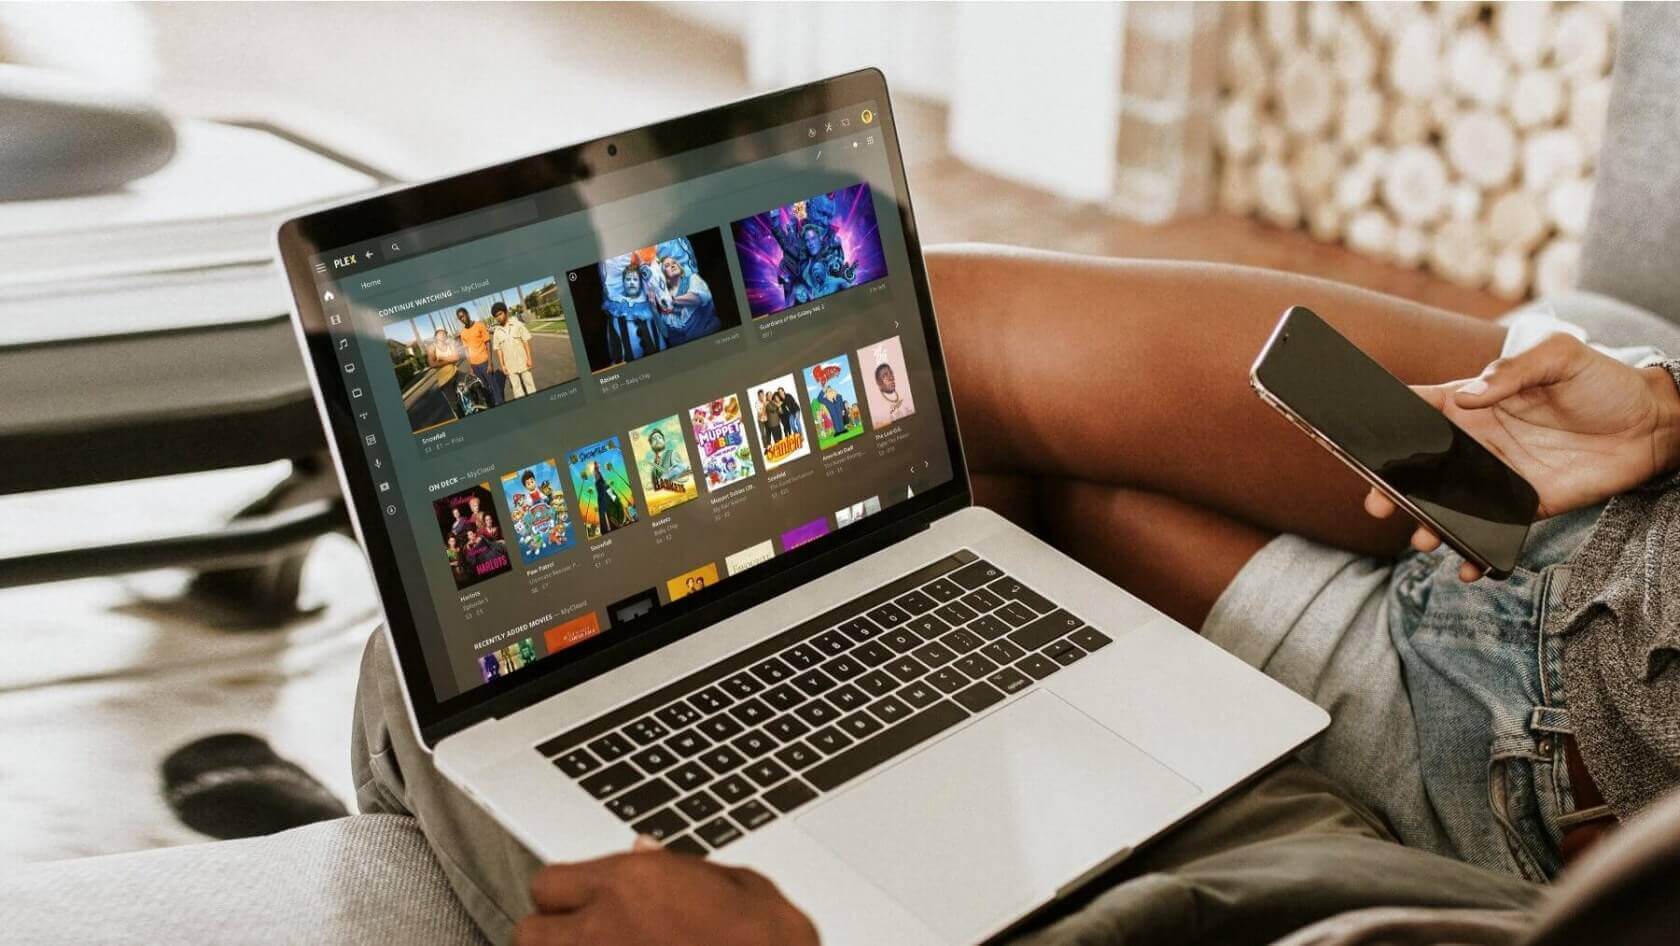 Plex warns all users to change their passwords following a data breach